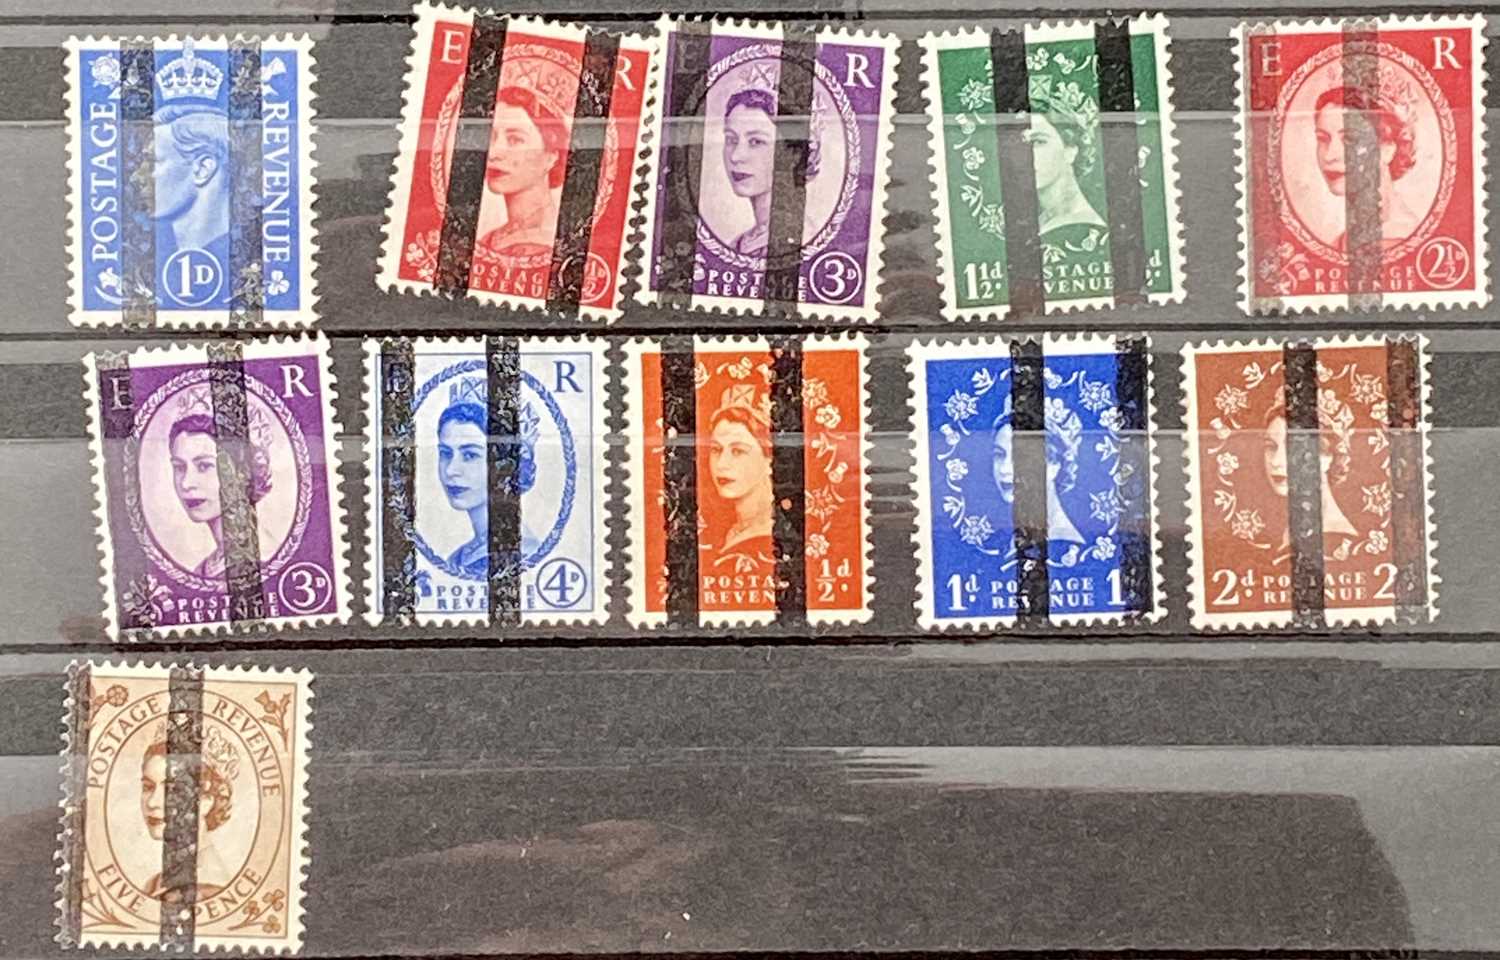 OFFERED WITH LOT 51 - GB STOCKBOOK - GV - QEII, mainly fine used or unmounted mint, GV1 high